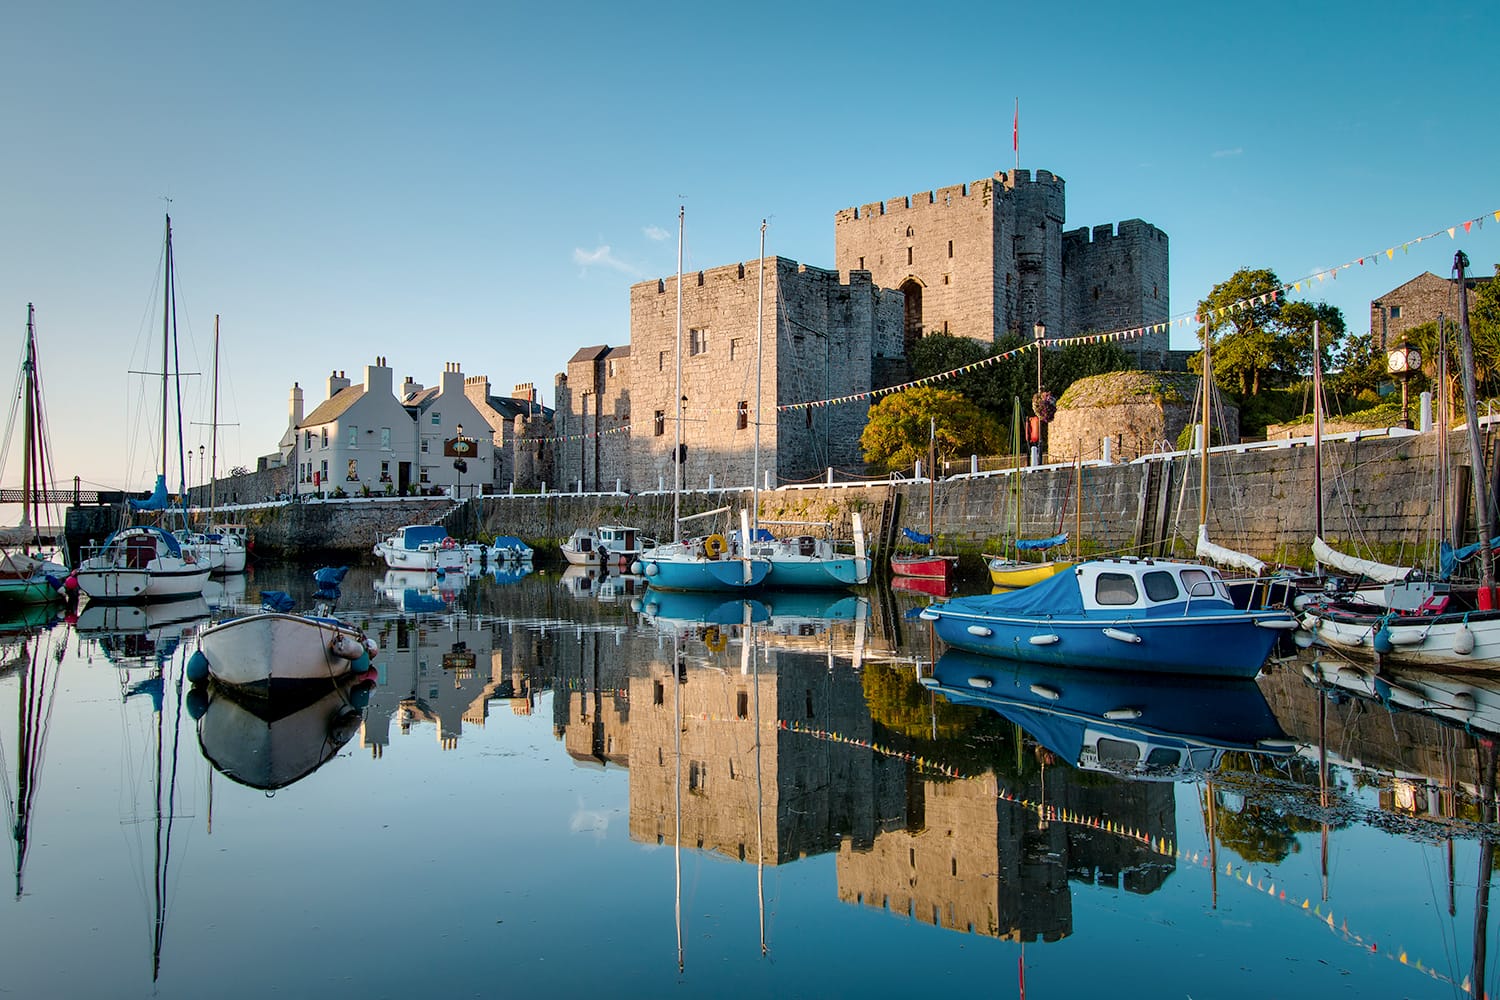 Castle Rushen in Castletown in the Isle of Man, with reflections in the harbor - taken shortly after sunrise